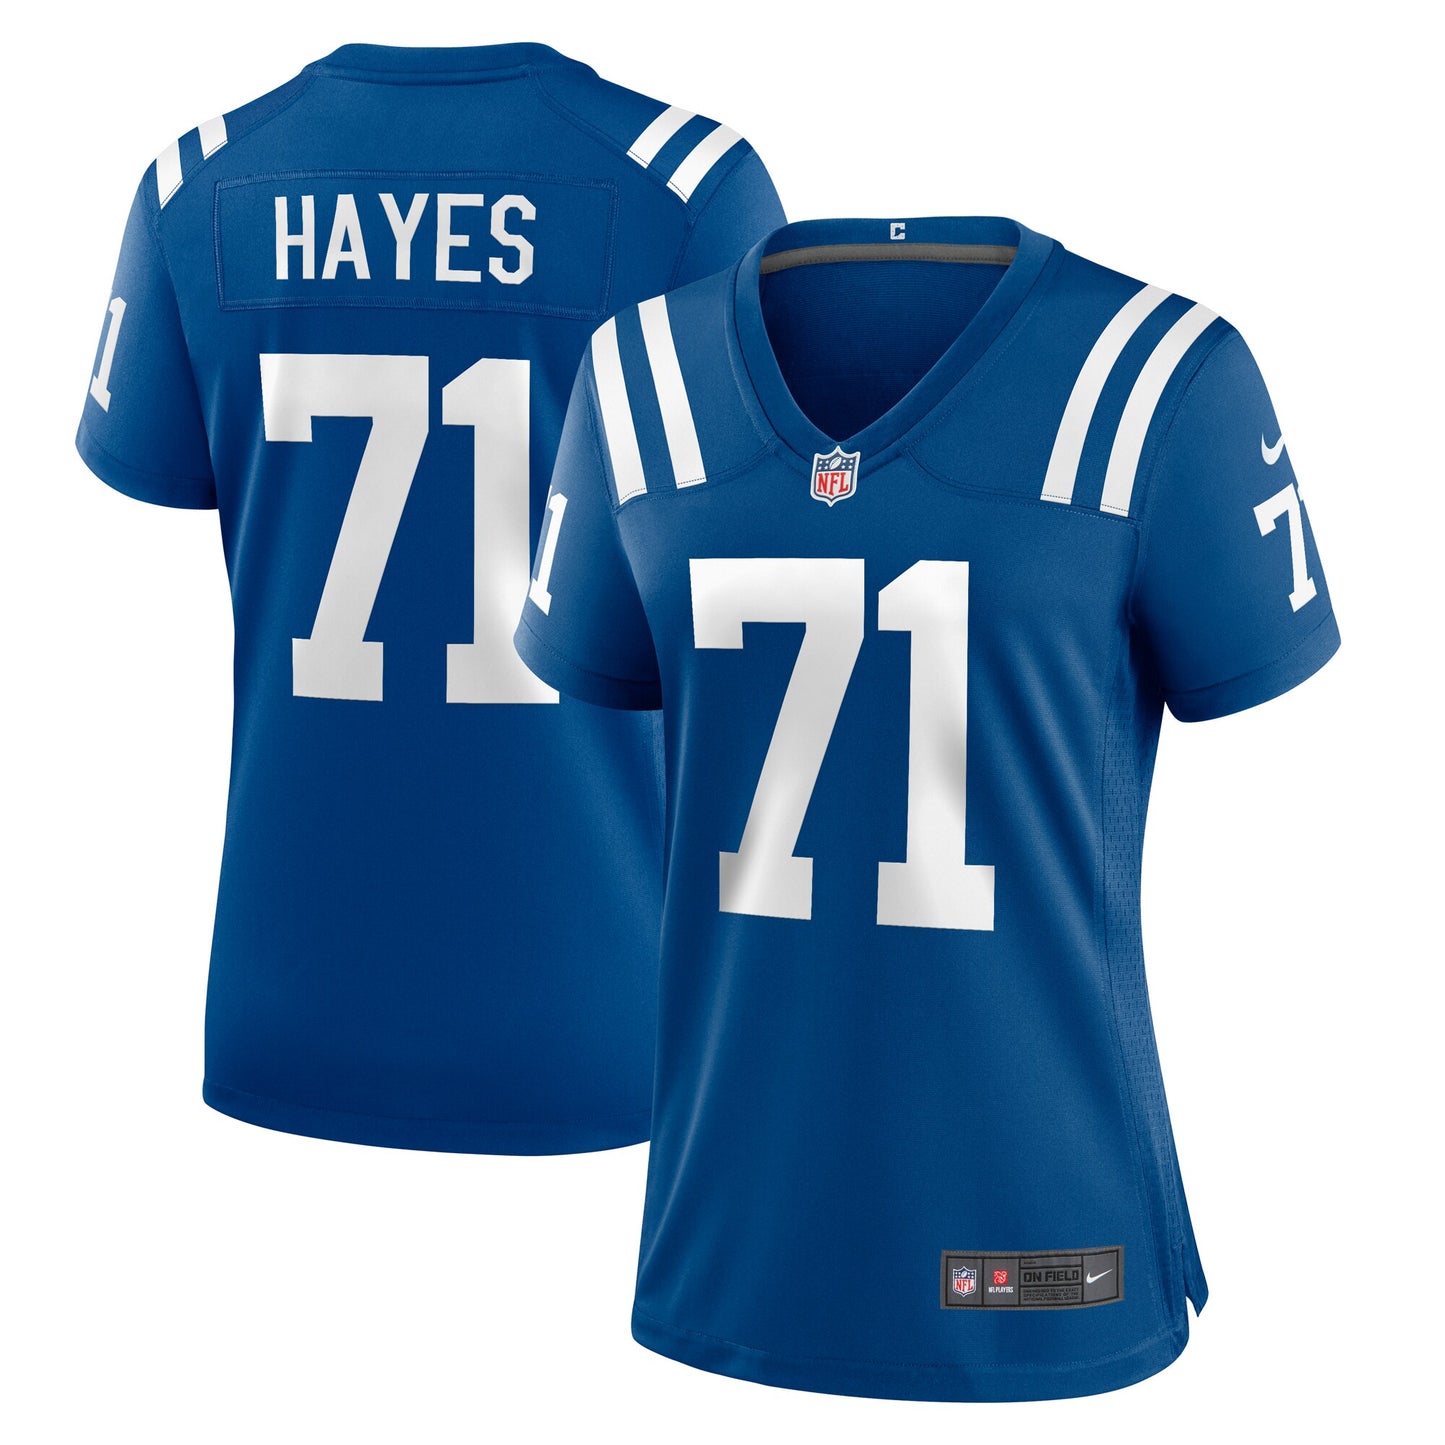 Ryan Hayes Indianapolis Colts Nike Women's Team Game Jersey - Royal